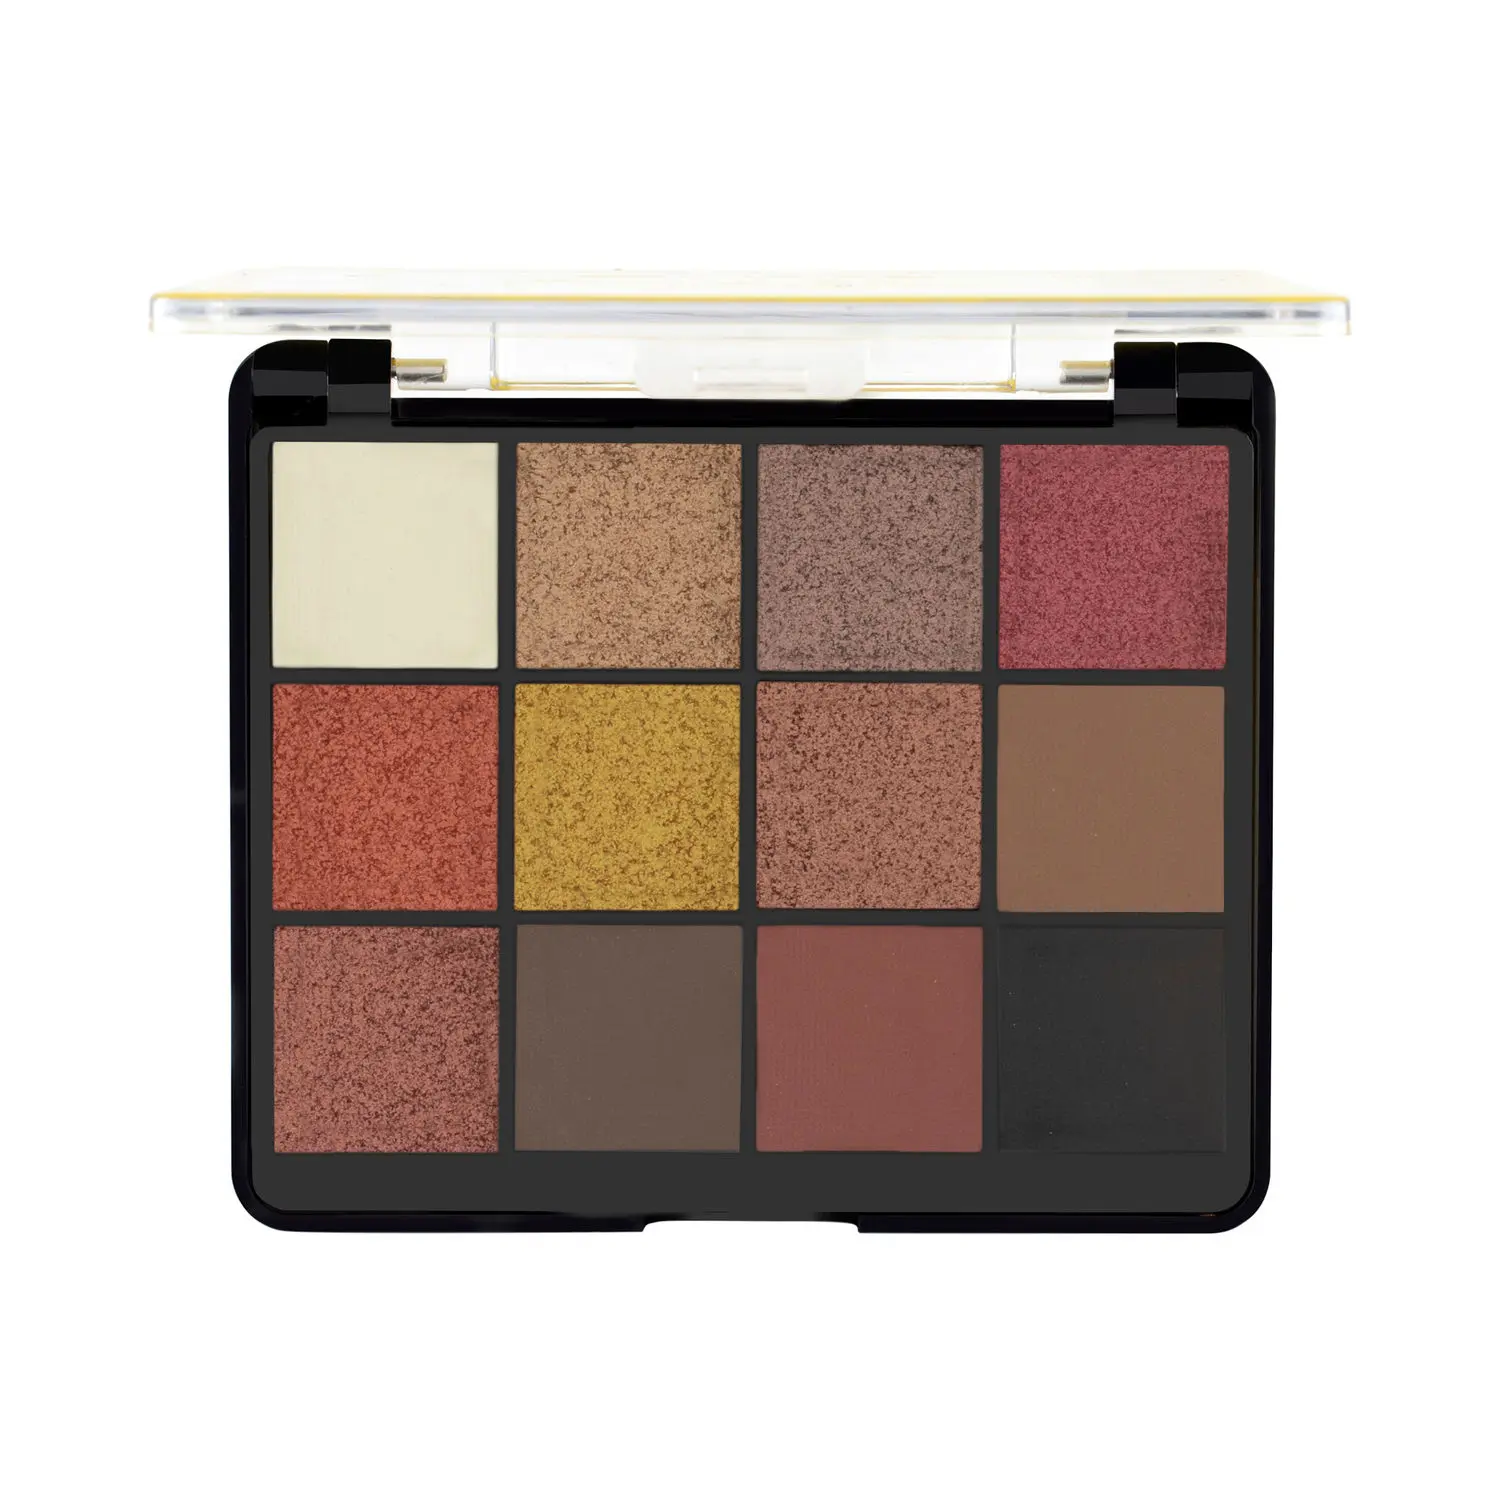 MARS Firefly Makeup Palette with Eyeshadows, Highlighter, Blusher and Bronzer - 02 | 26g